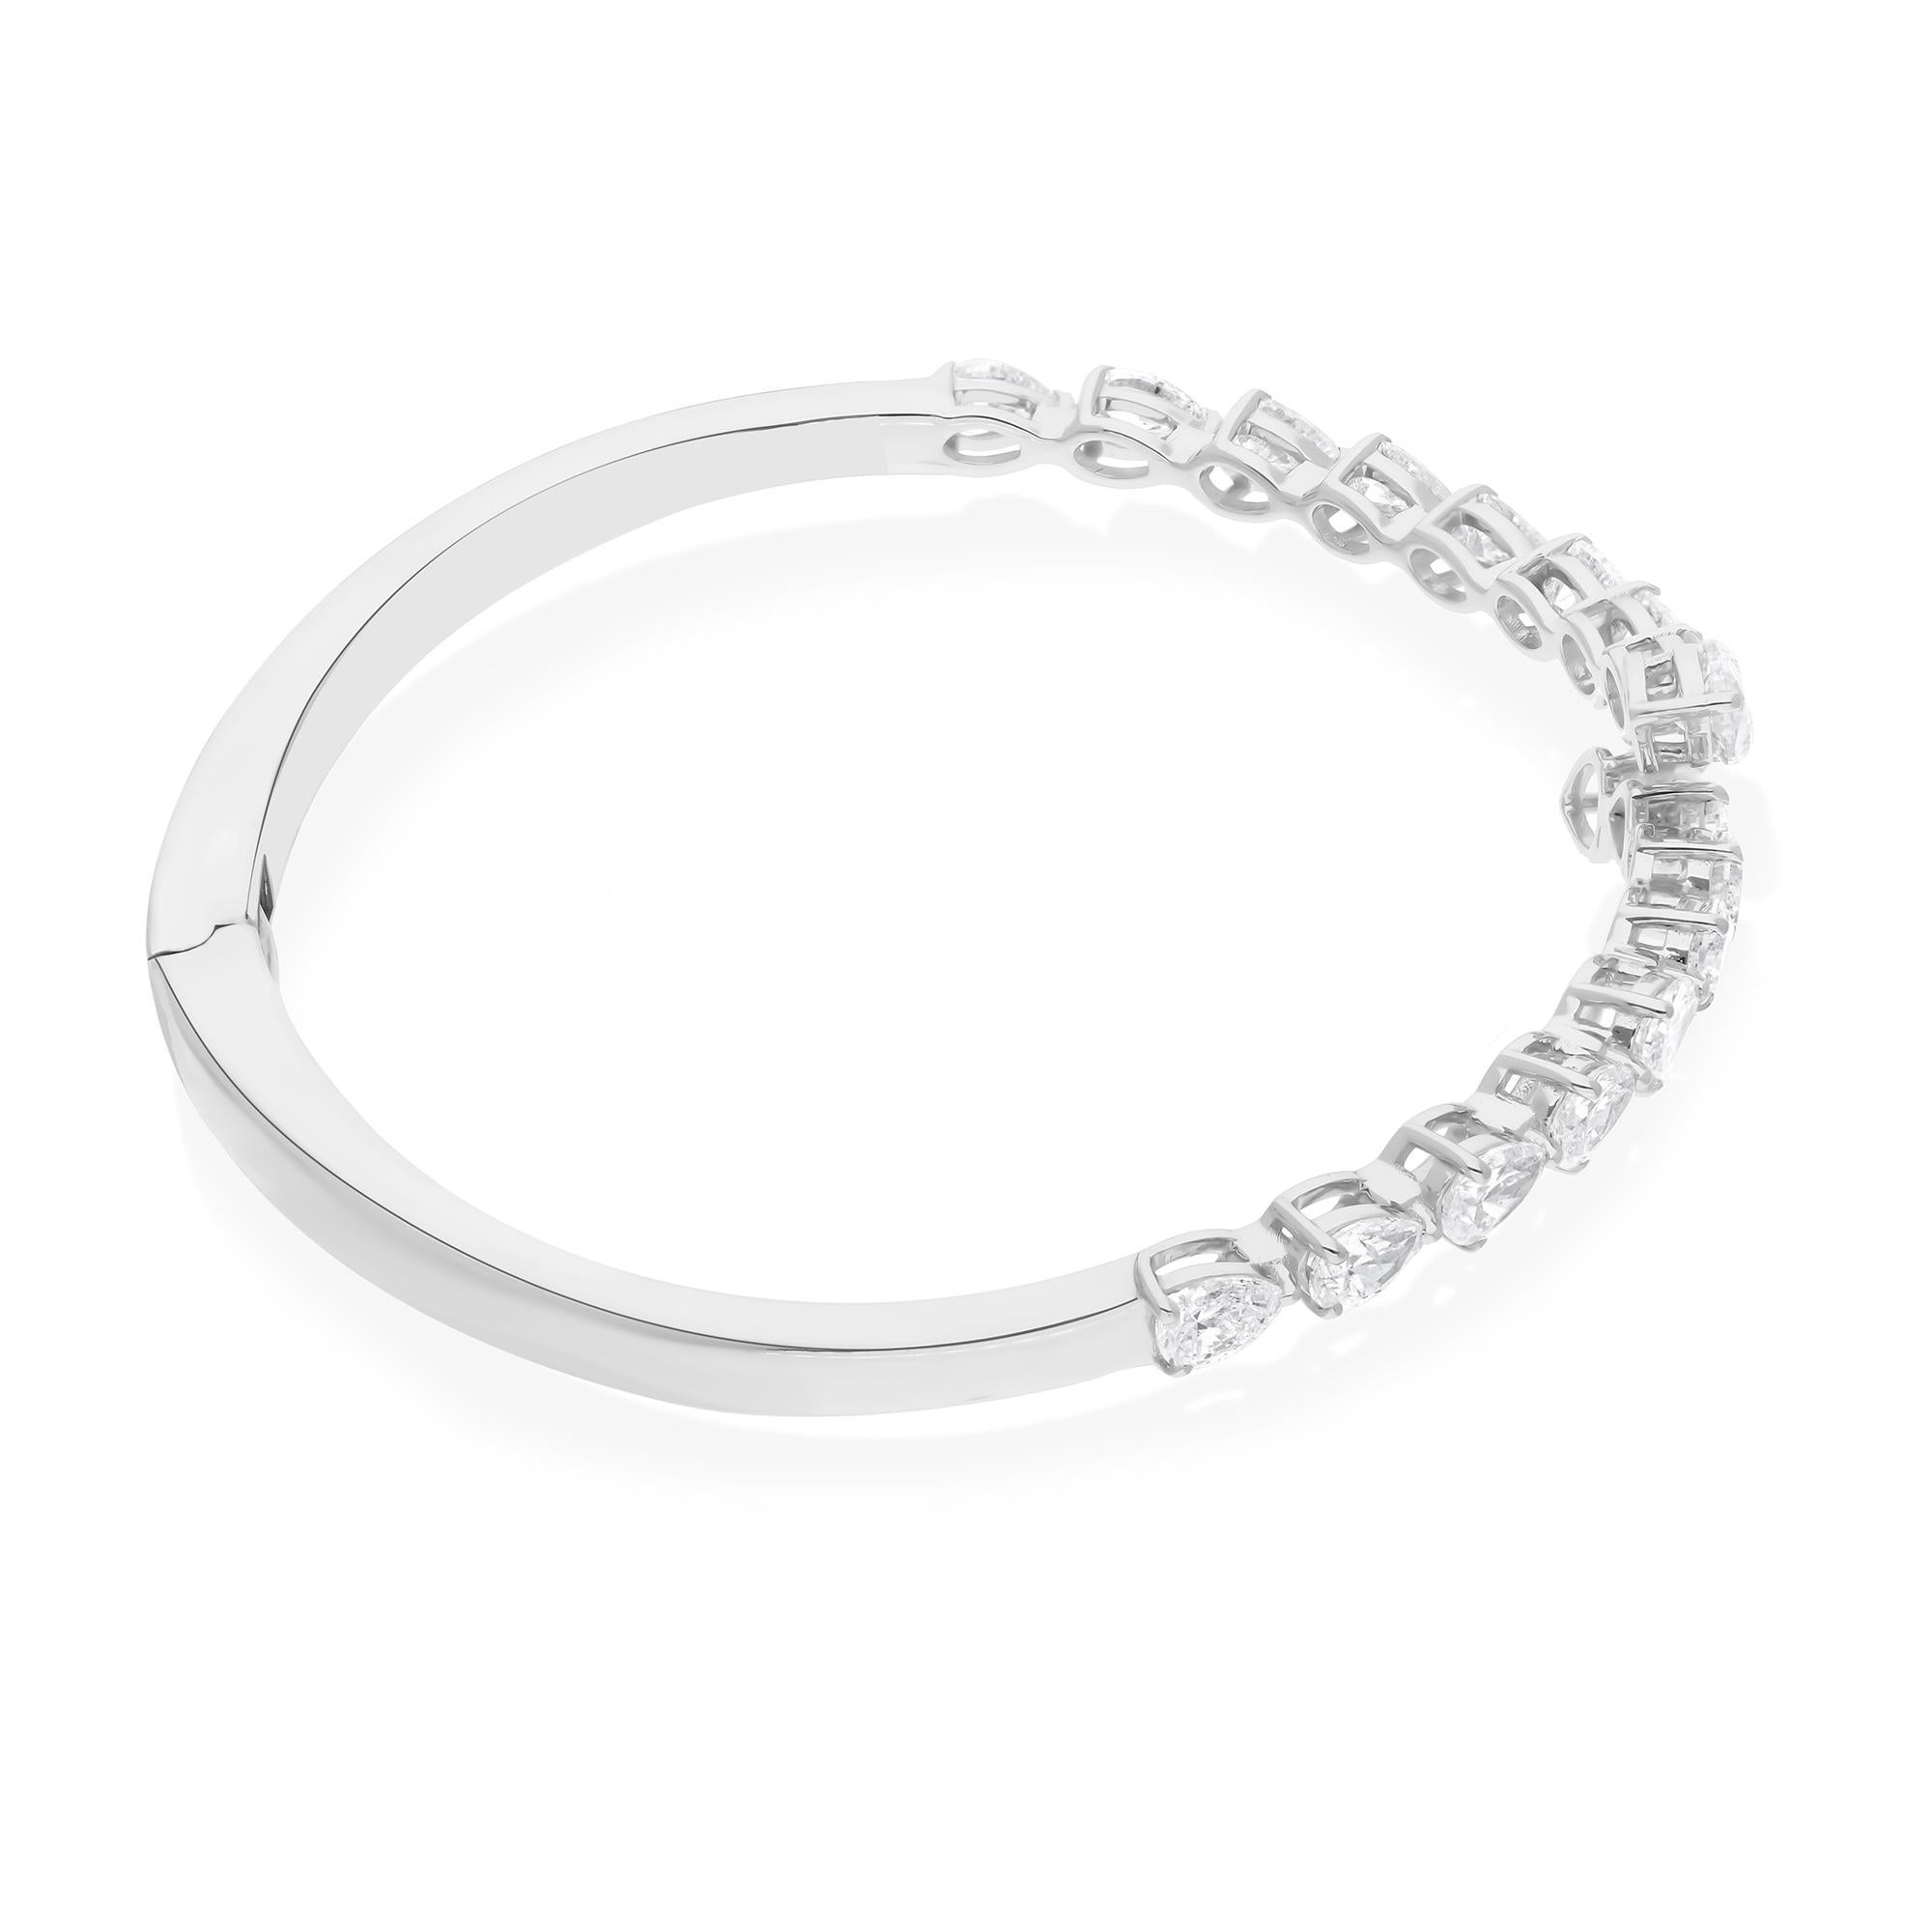 Crafted with meticulous attention to detail, this breathtaking cuff bangle bracelet features a stunning pear-shaped diamond at its focal point. Encased in lustrous 18 karat white gold, this timeless piece exudes elegance and sophistication.

FOLLOW